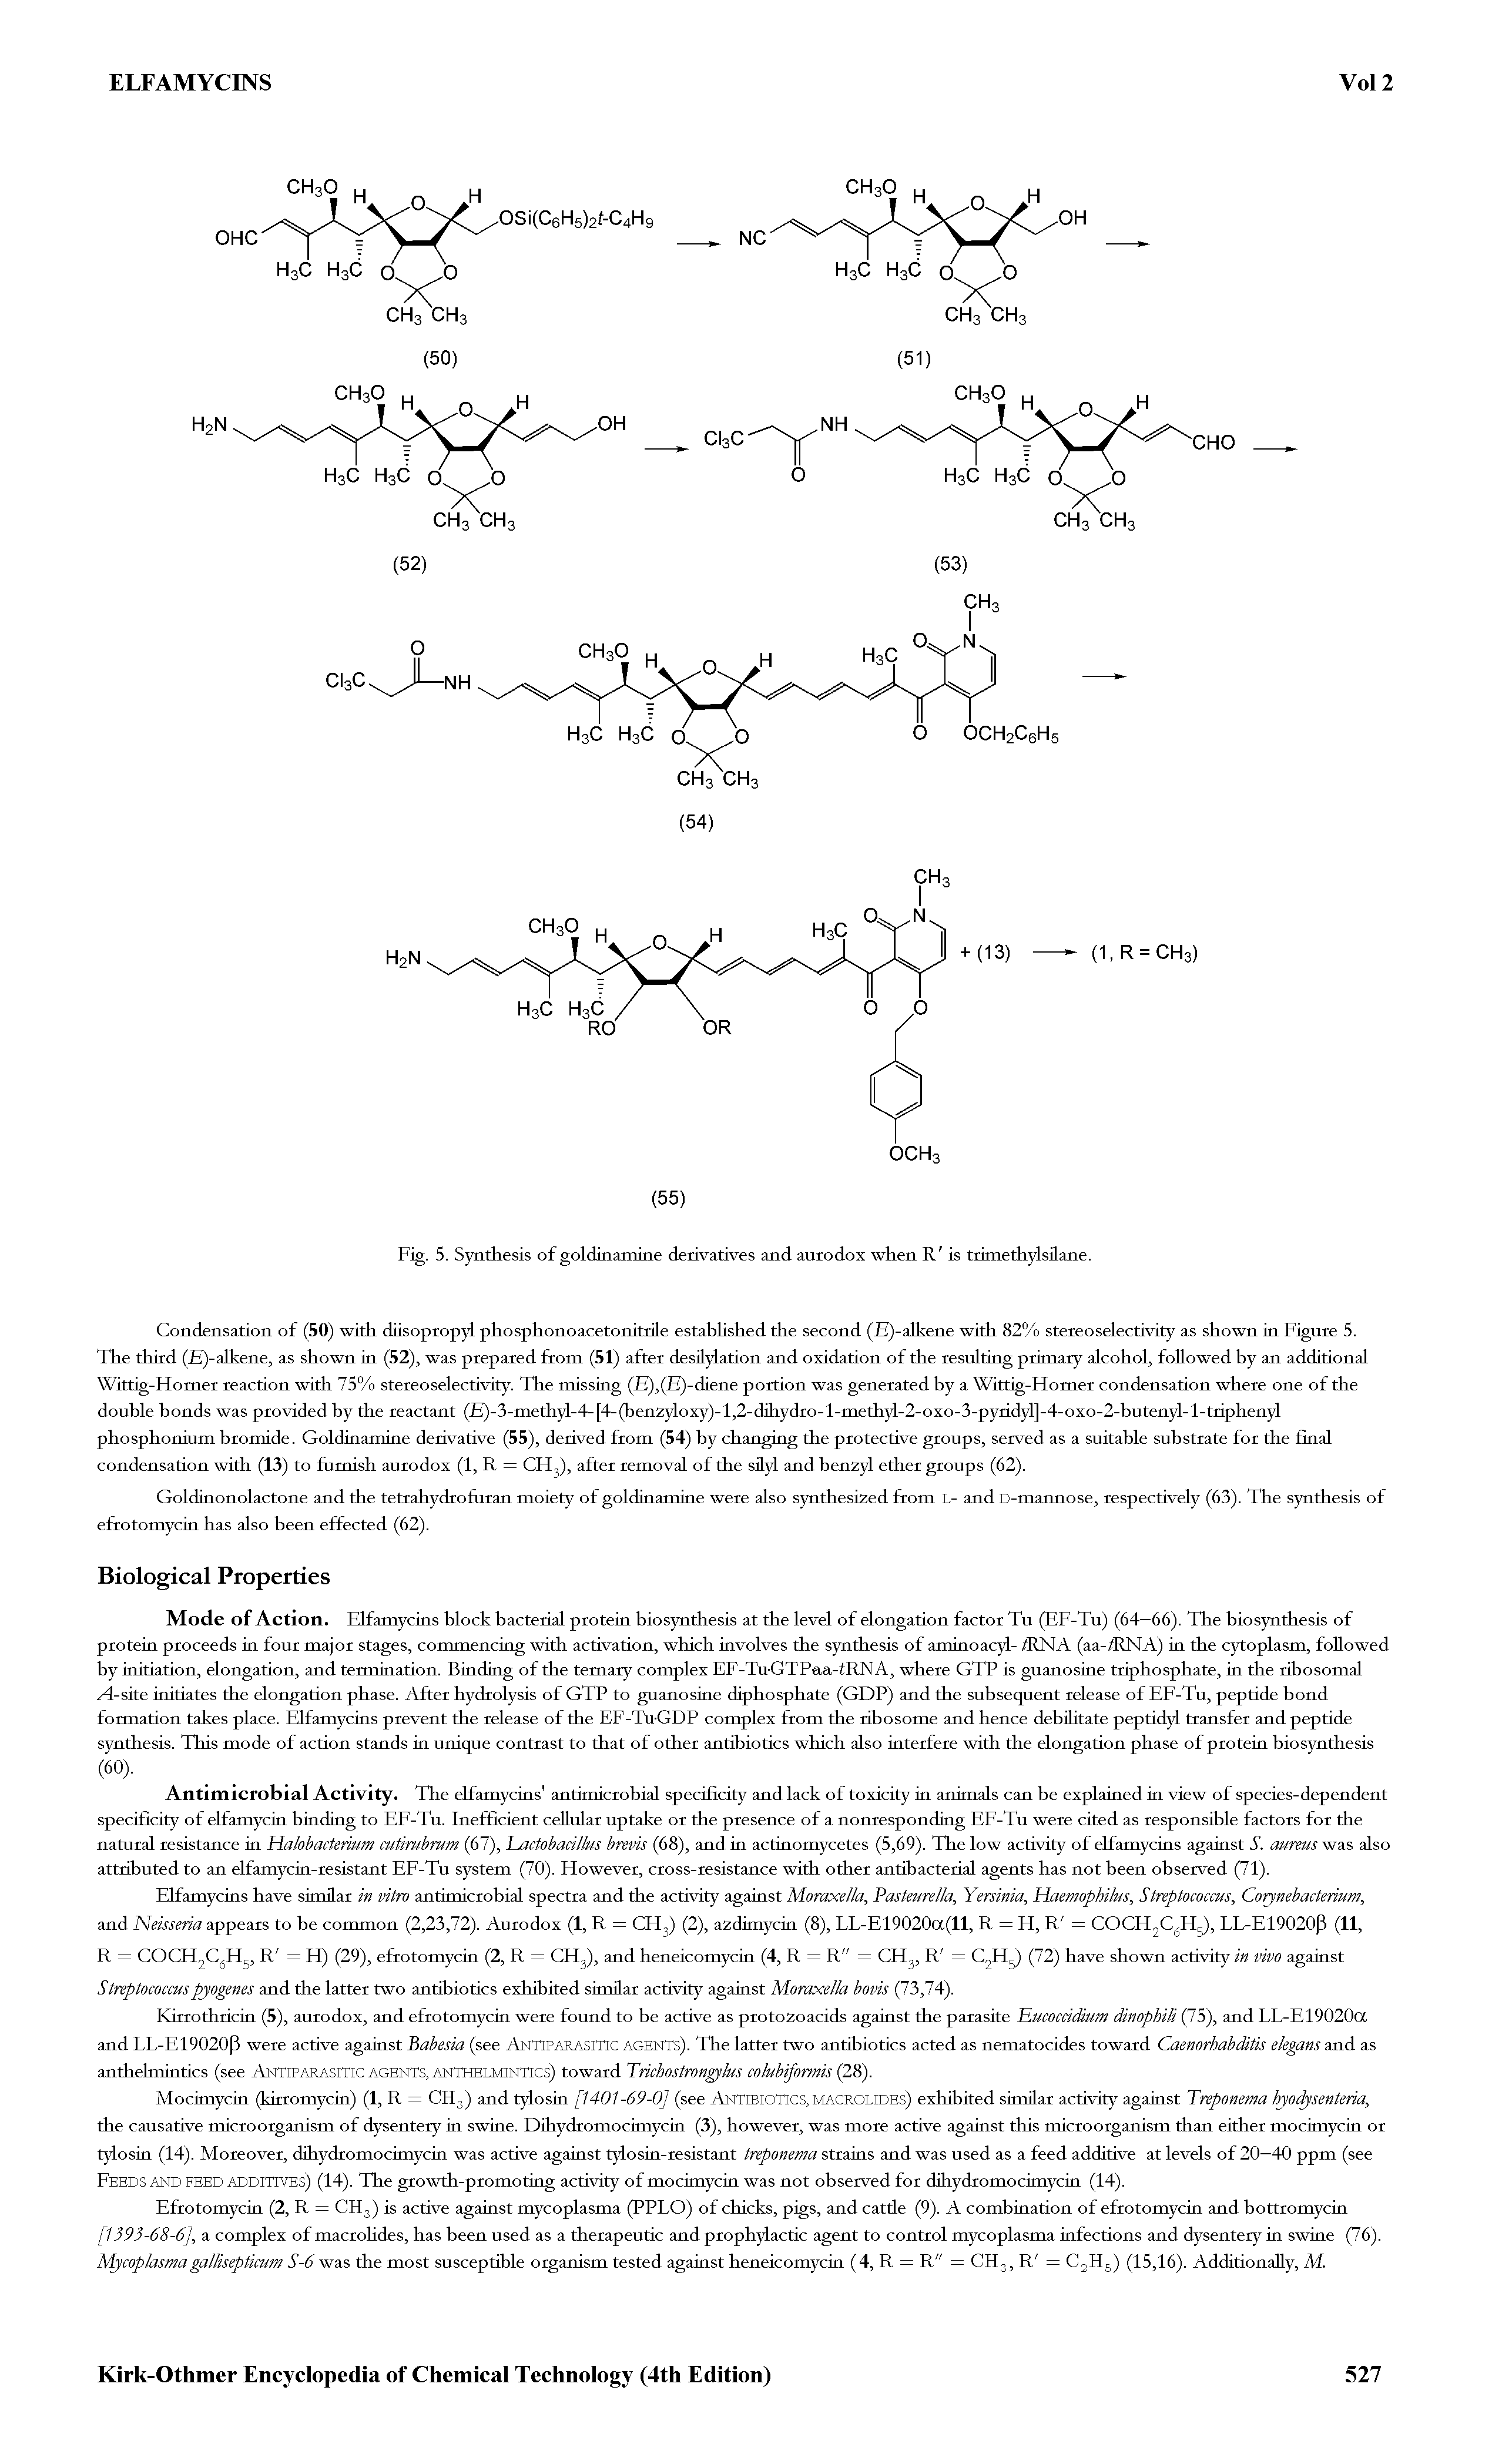 Fig. 5. Synthesis of goldinamine derivatives and aurodox when is trimethylsilane.